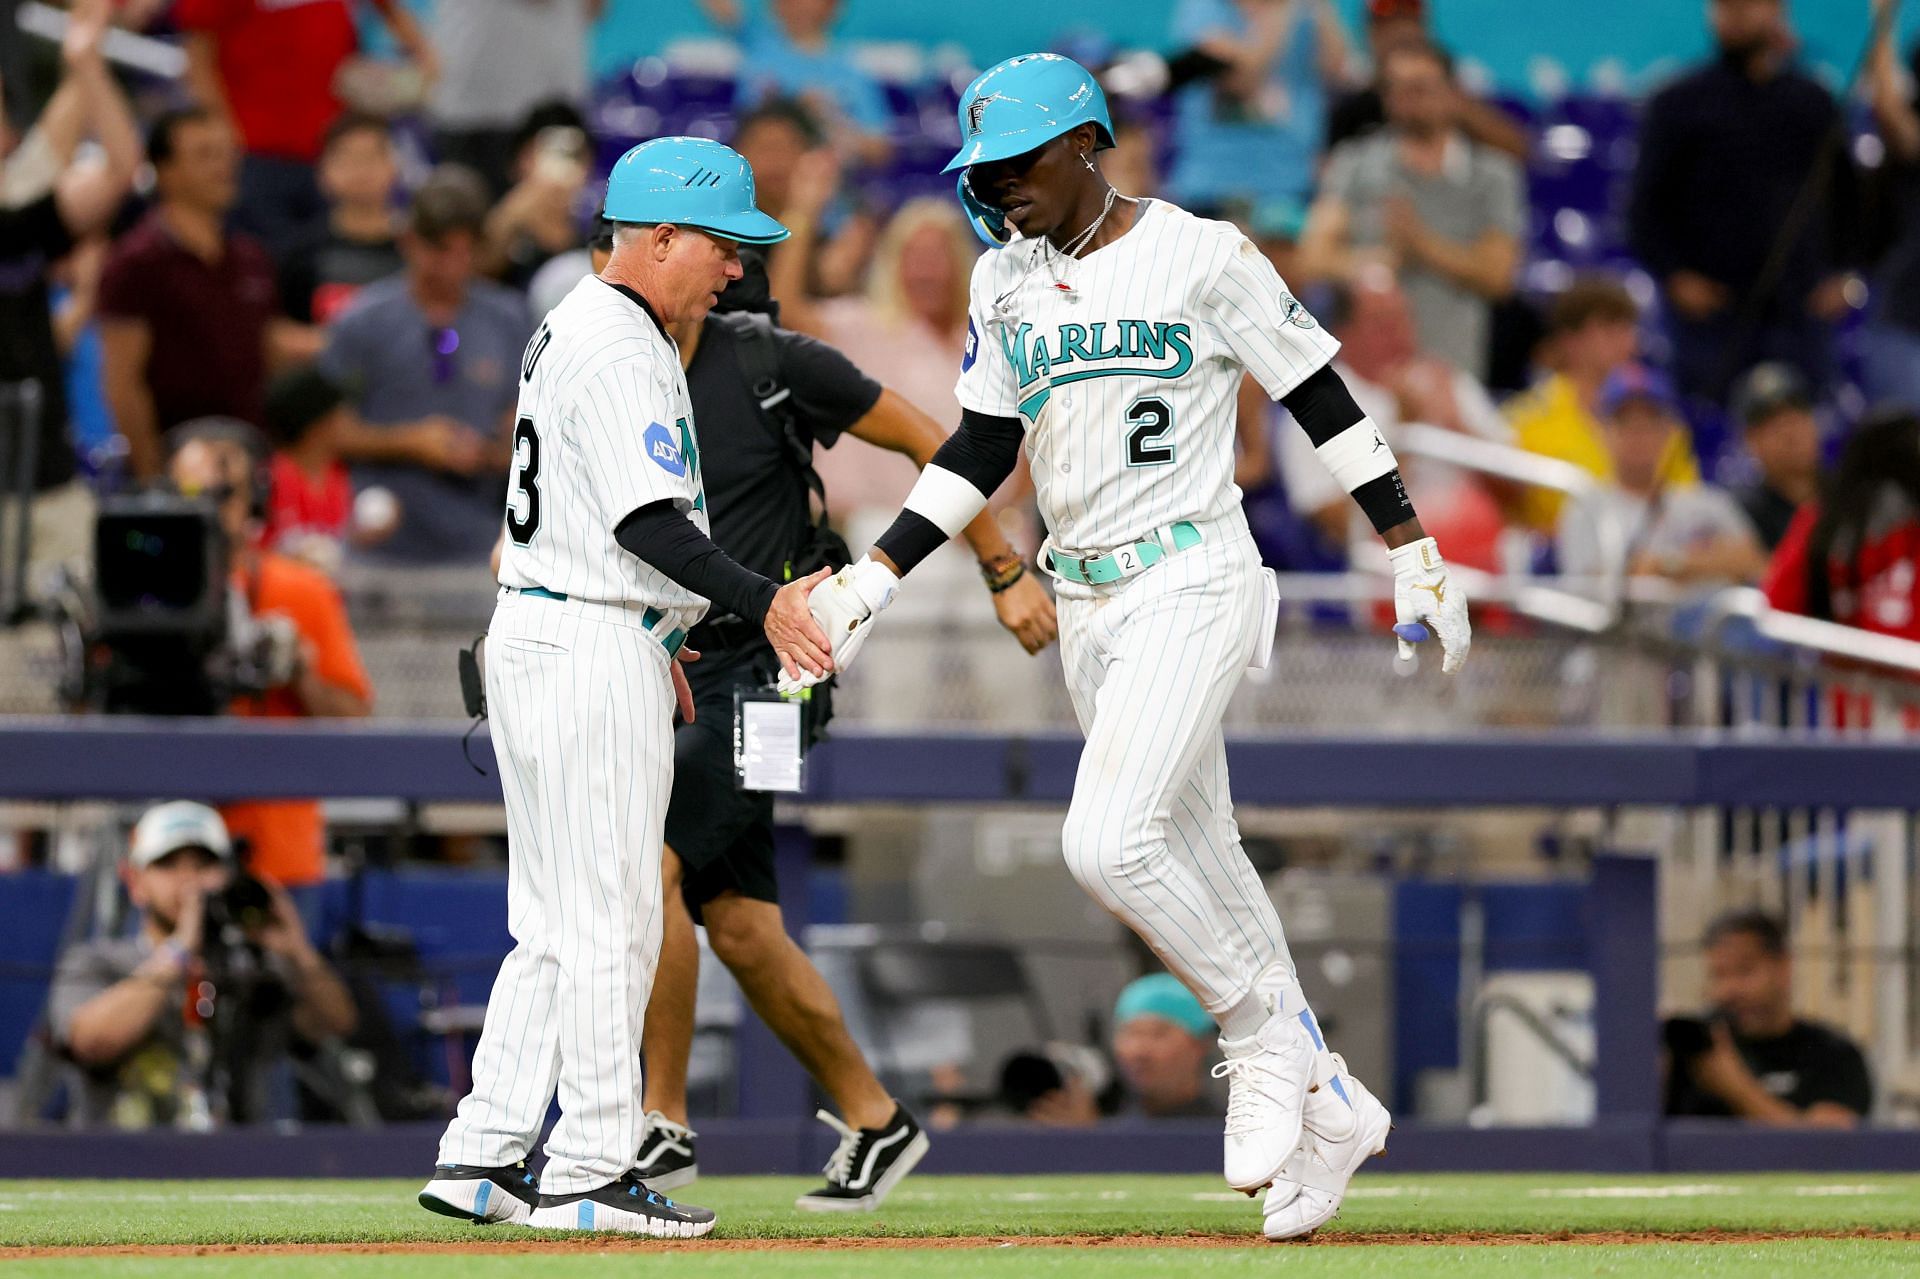 Miami Marlins fans react to Jazz Chisholm Jr. leaving game after suffering  injury sliding headfirst into second base: Well baseball sucks today